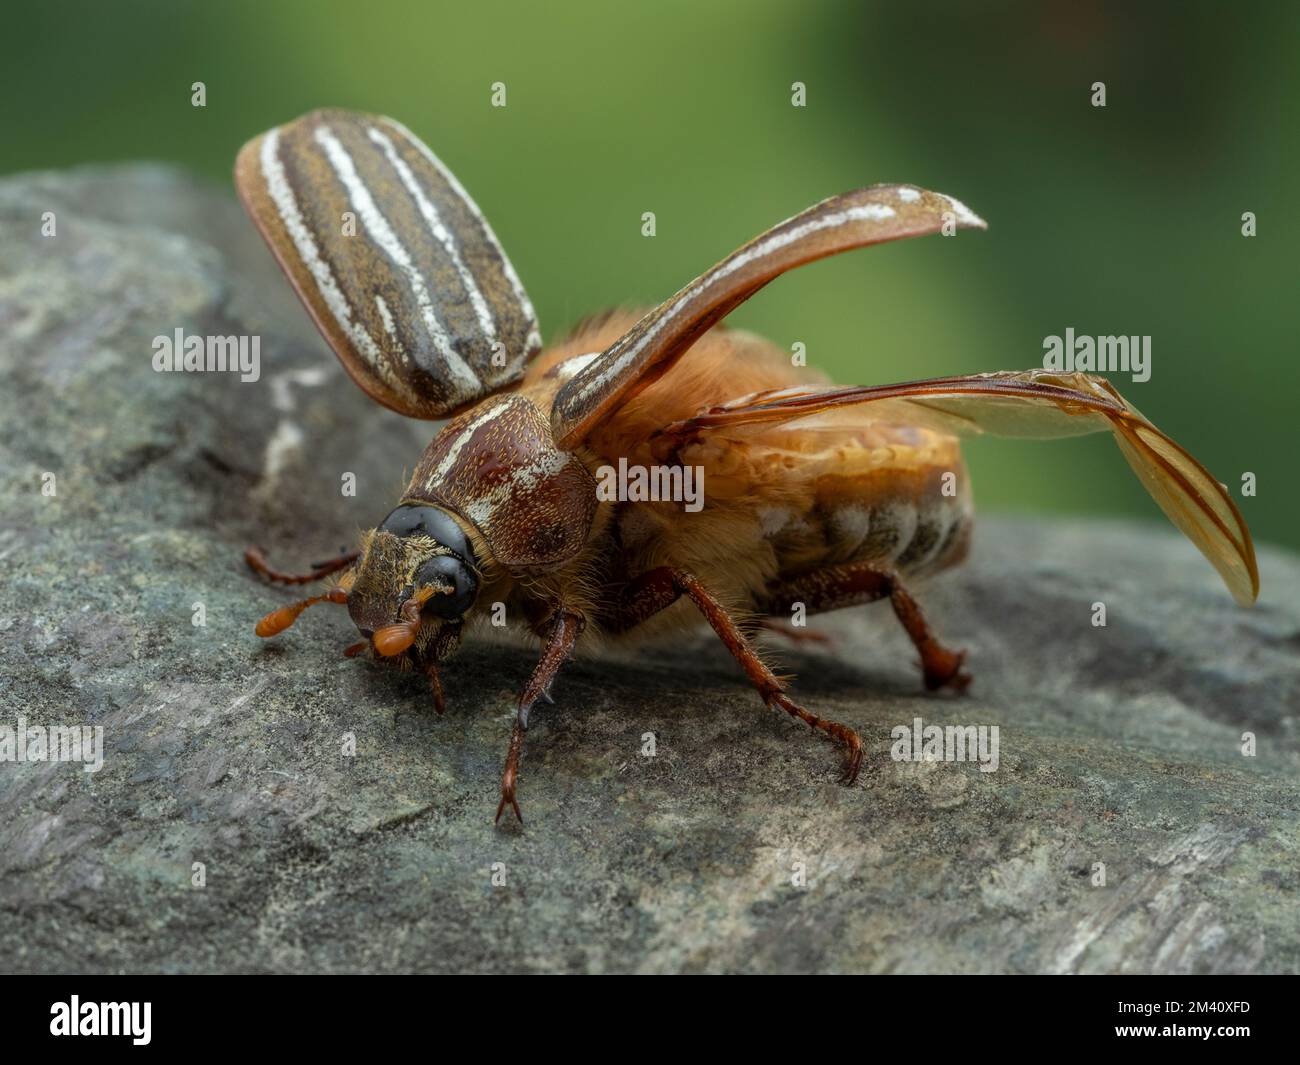 side view of a female ten-lined June beetle (Polyphylla decemlineata) with its hard forewings (elytra) raised and flight wings unfolding Stock Photo